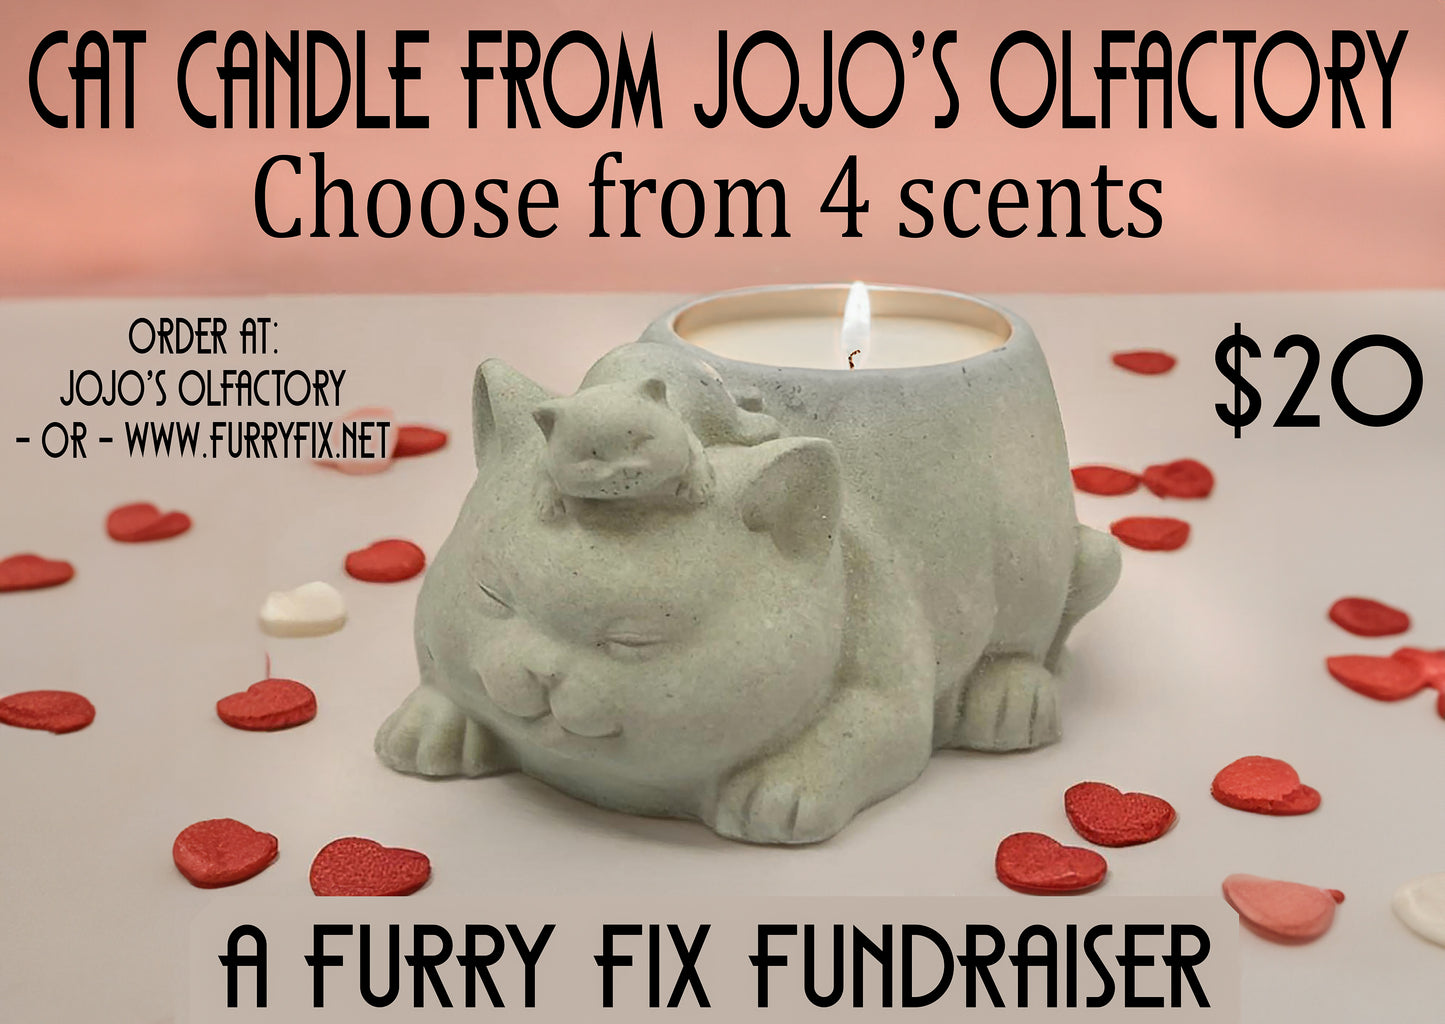 Cat candle!  So awesome!  Fundraiser for Furry Fix - ready in 5 days - pick up in Wabash.